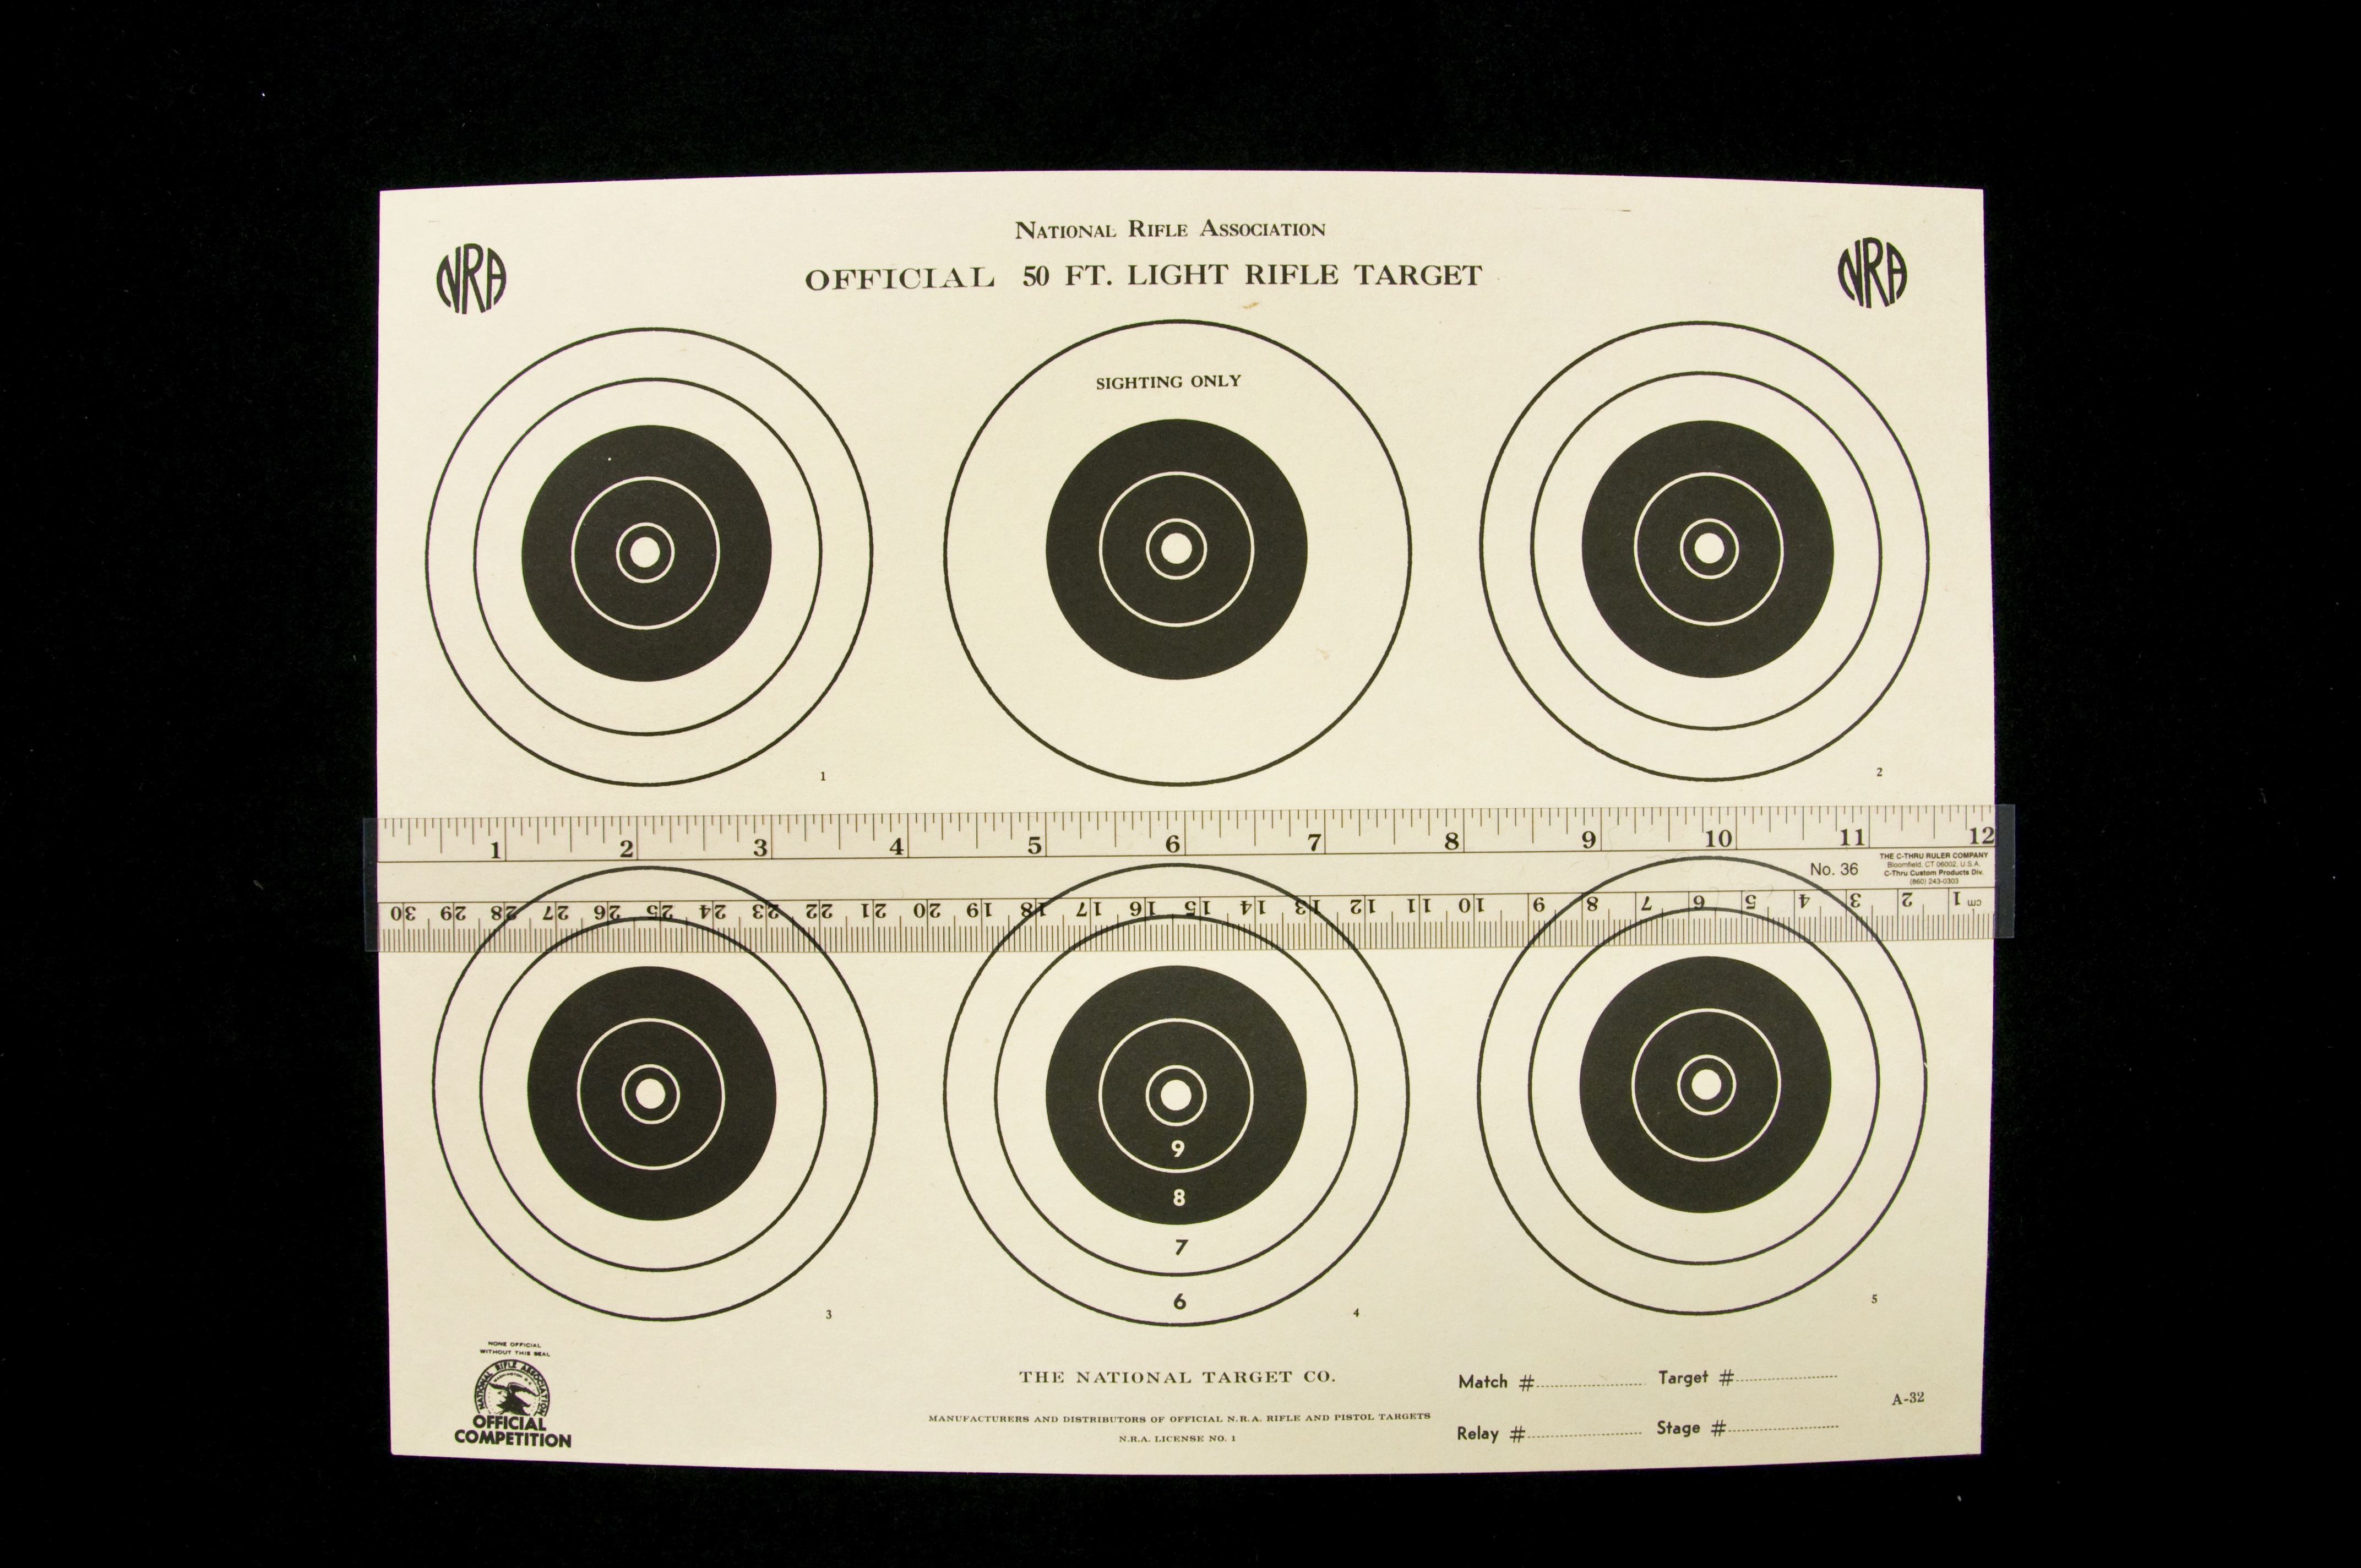 National Rifle Association 50 Ft. Rifle Target with six targets all of which have two larger white outer circles and three smaller inner black circles with a little white dot in the middle except for one on the top middle has one large white outer circle with three smaller inner black circles with a little white dot in the middle labeled SIGHTING ONLY, and the target has a ruler lying horizontally in the middle of the sheet.